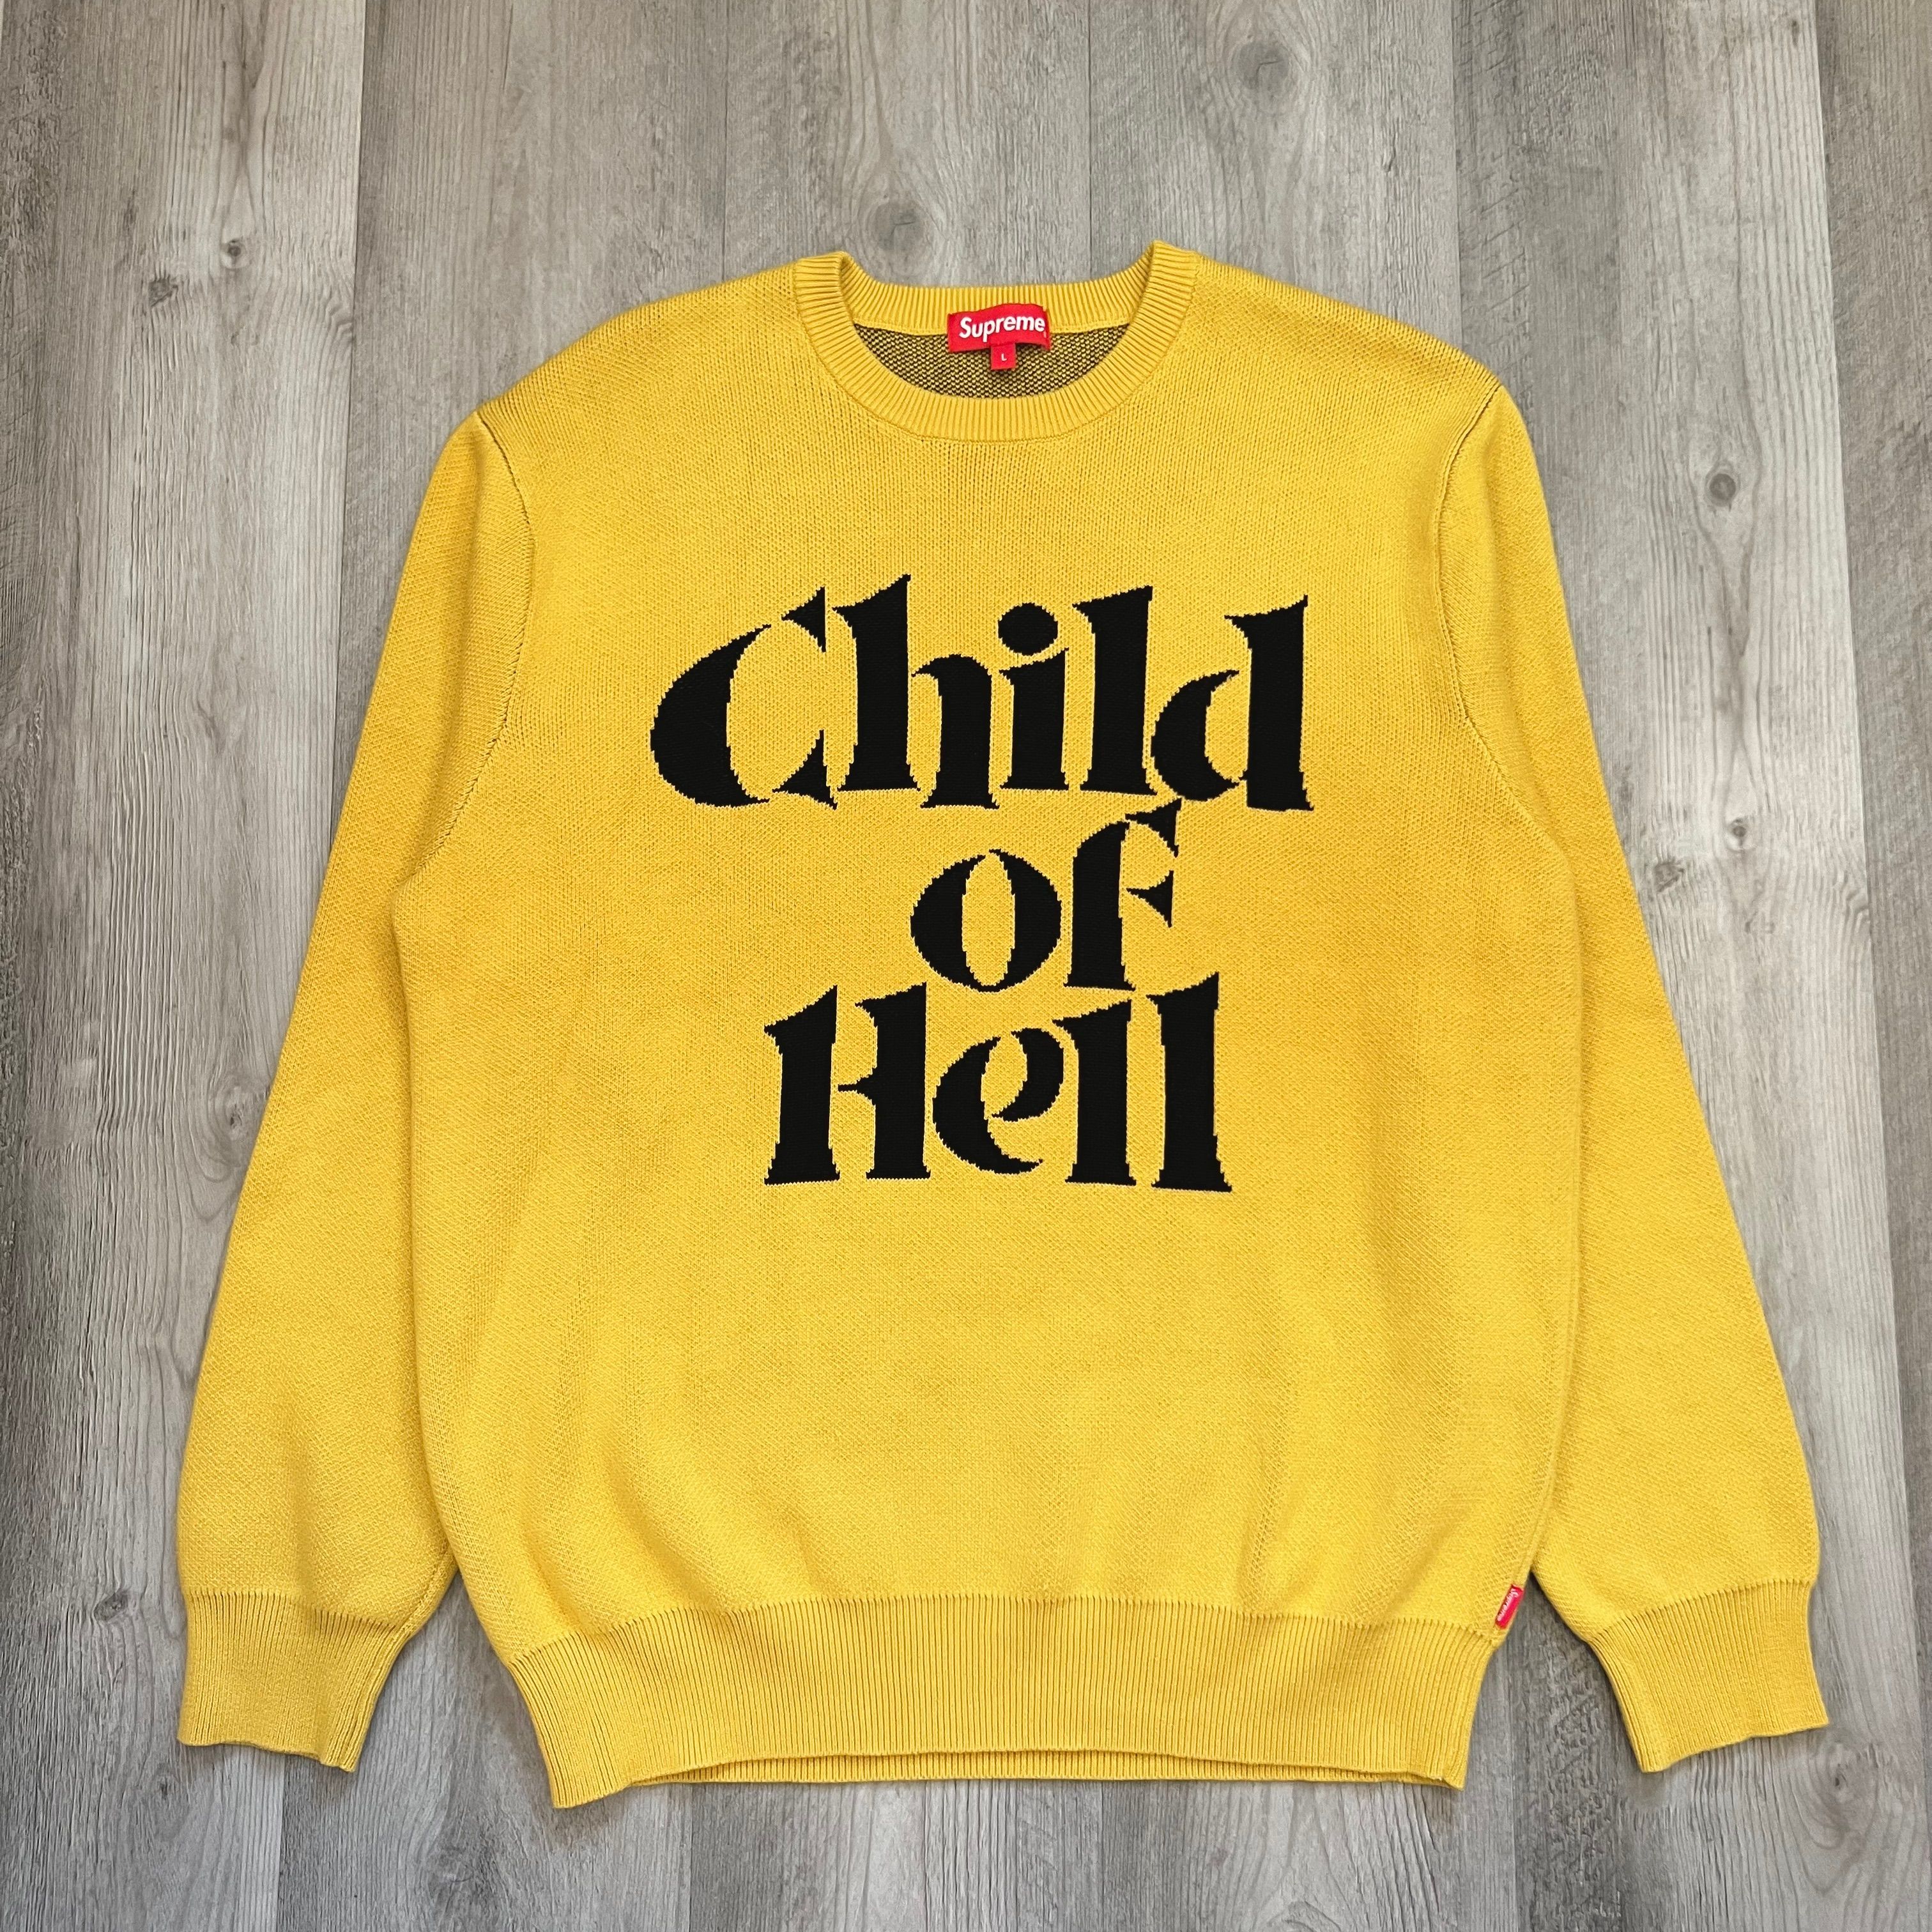 Pre-owned Supreme Child Of Hell Crewneck Sweater Yellow / Black Fw15